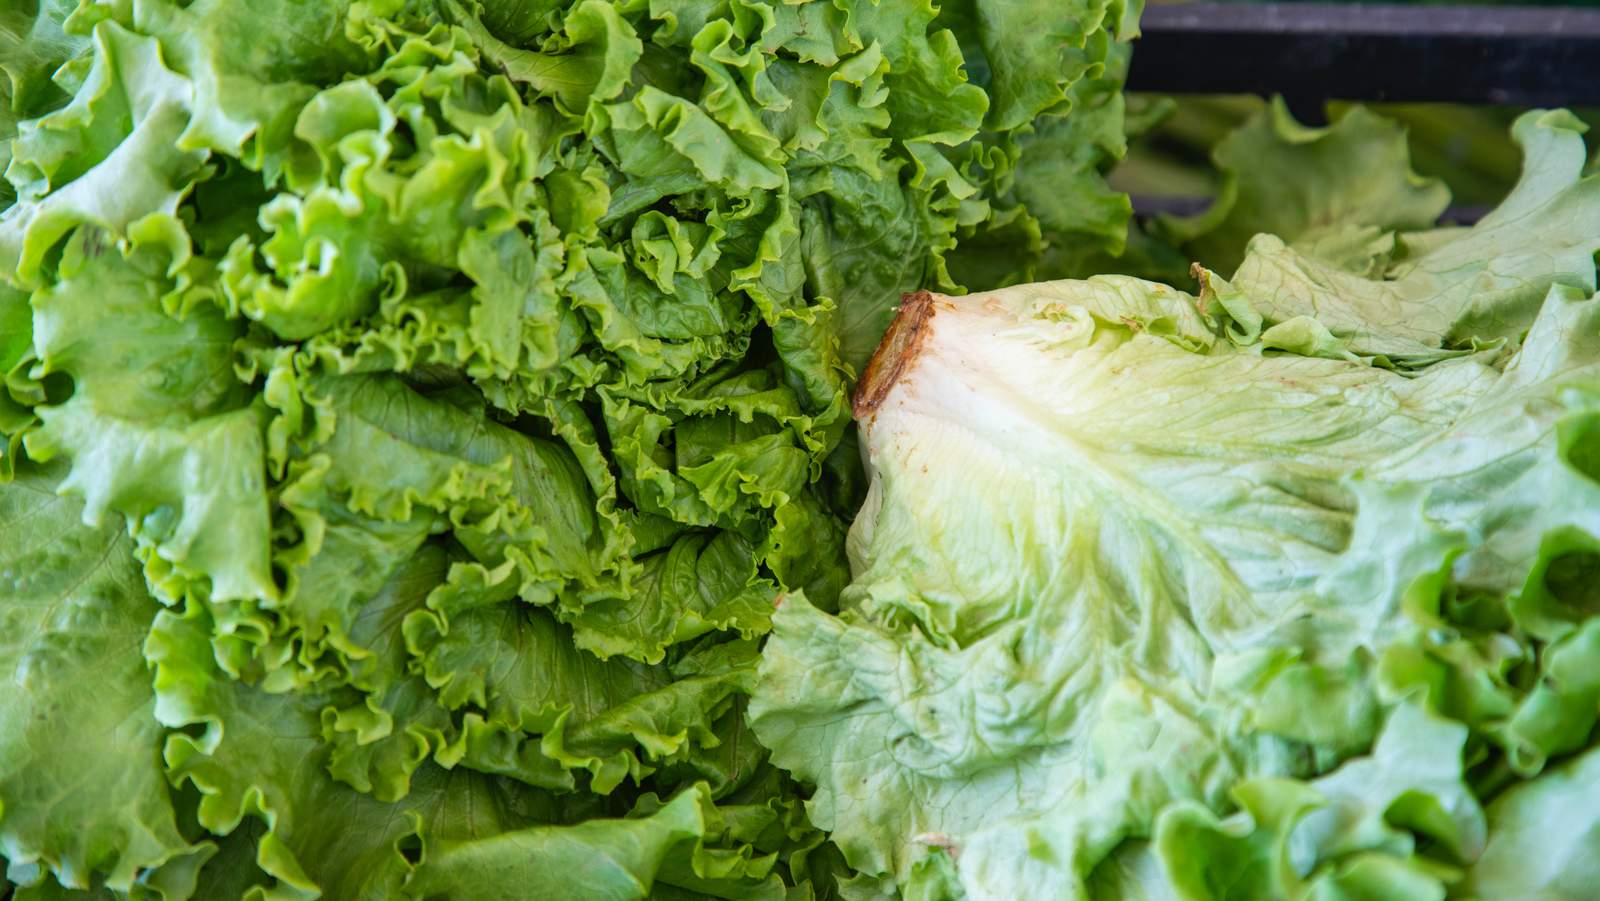 Romaine lettuce heads sold at Walmart stores test positive for E. coli